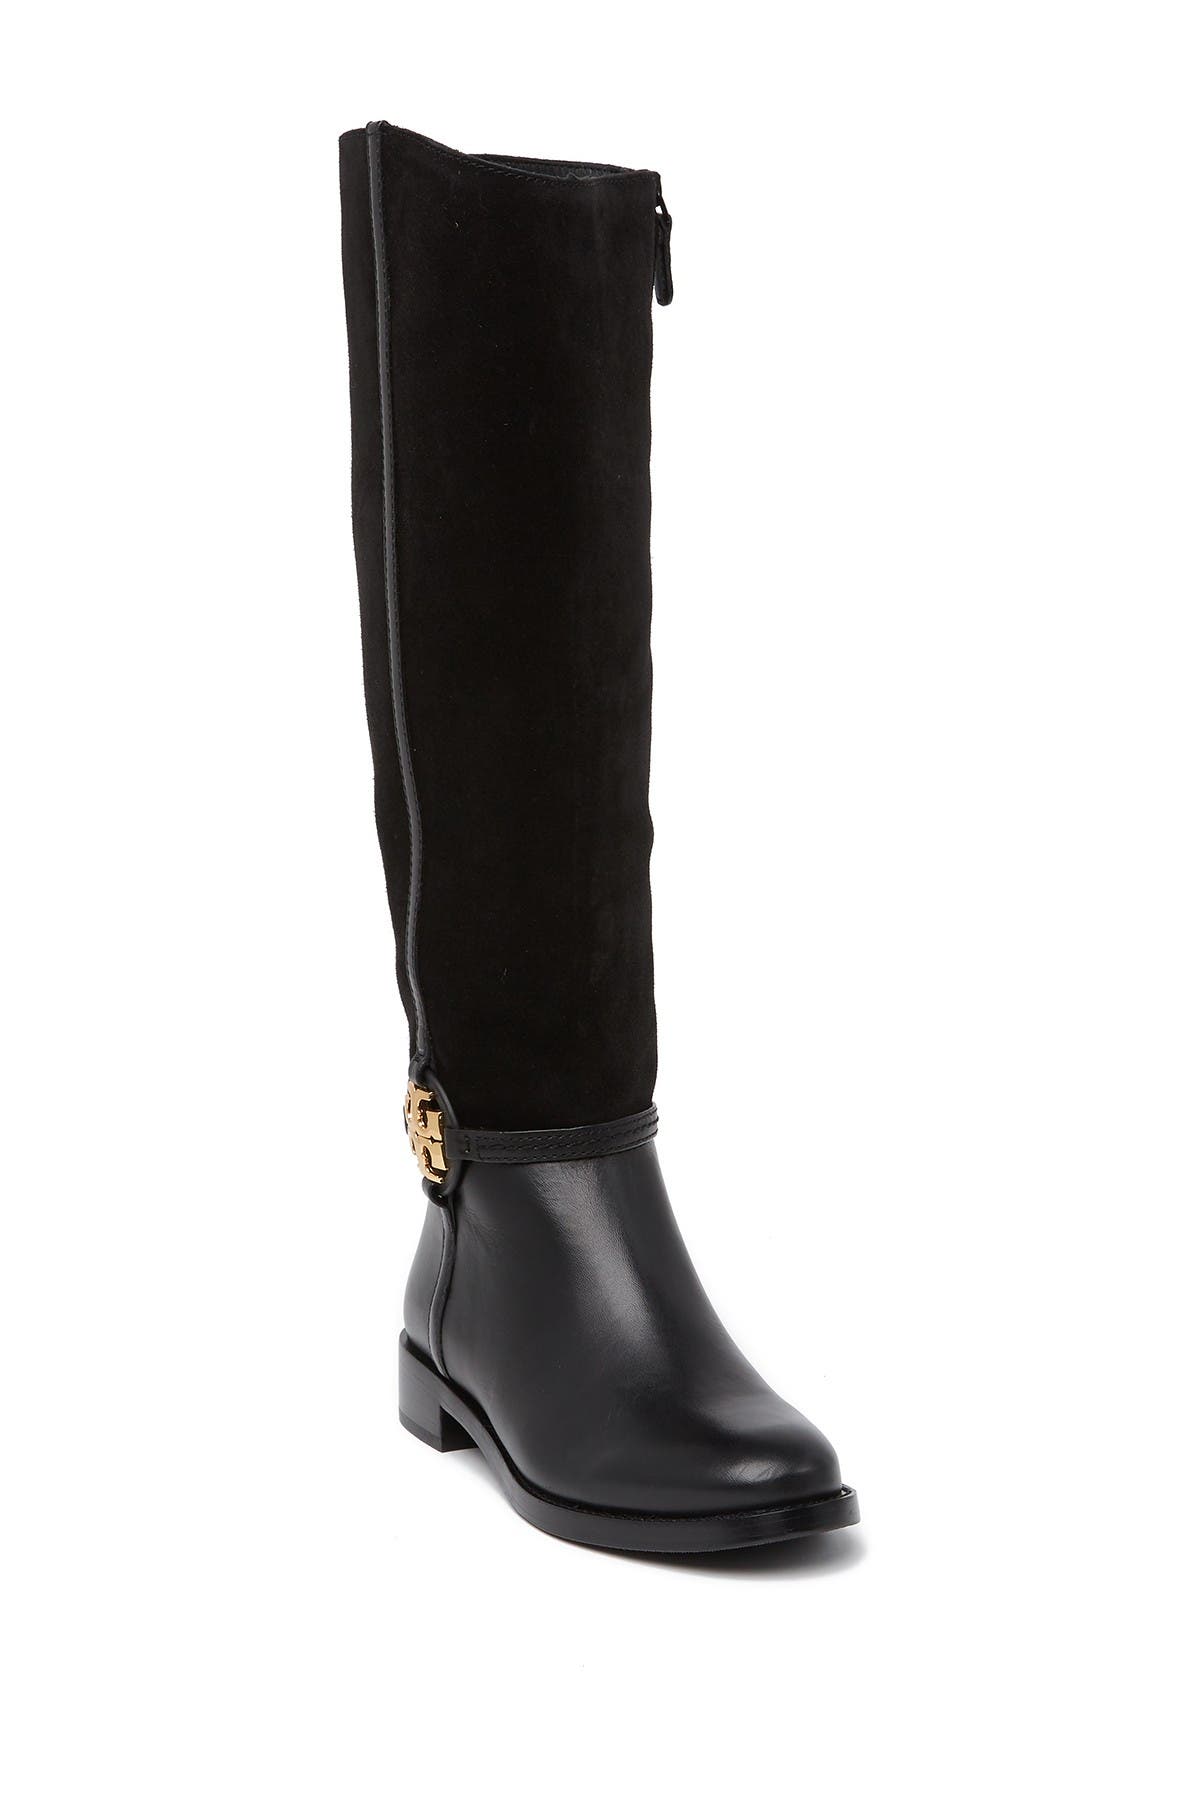 tory burch riding boots nordstrom